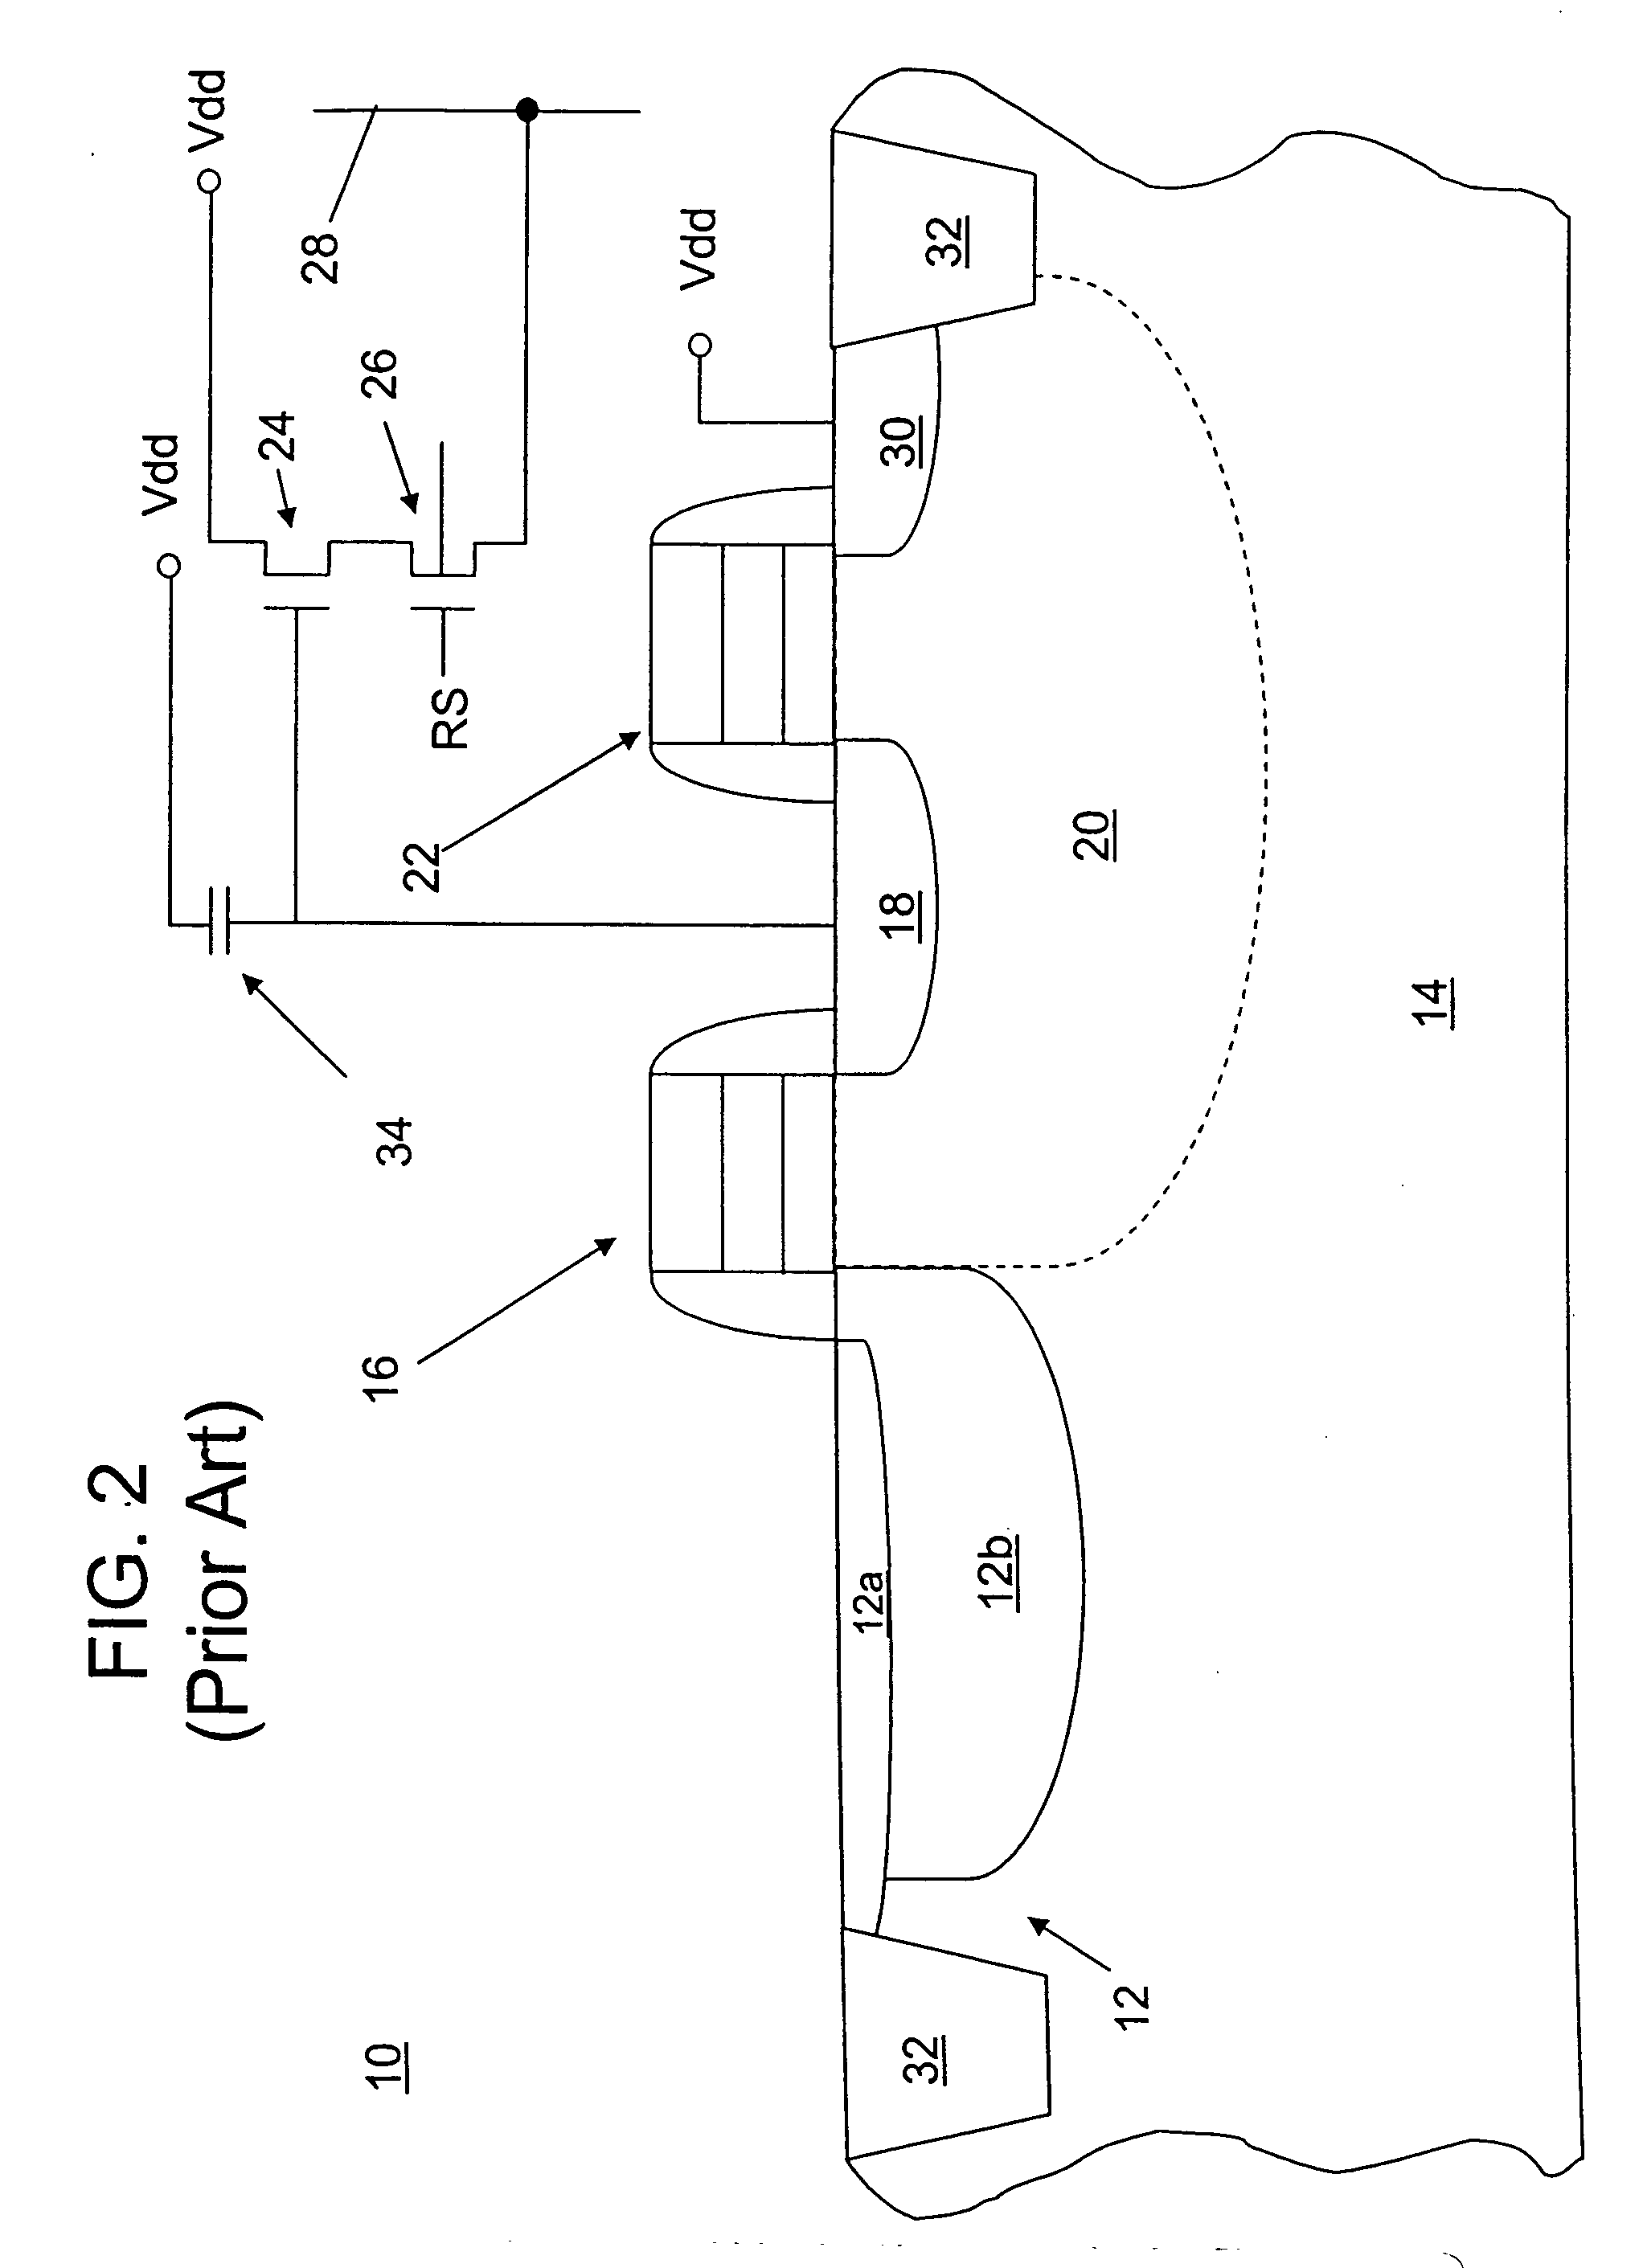 Imager photo diode capacitor structure with reduced process variation sensitivity